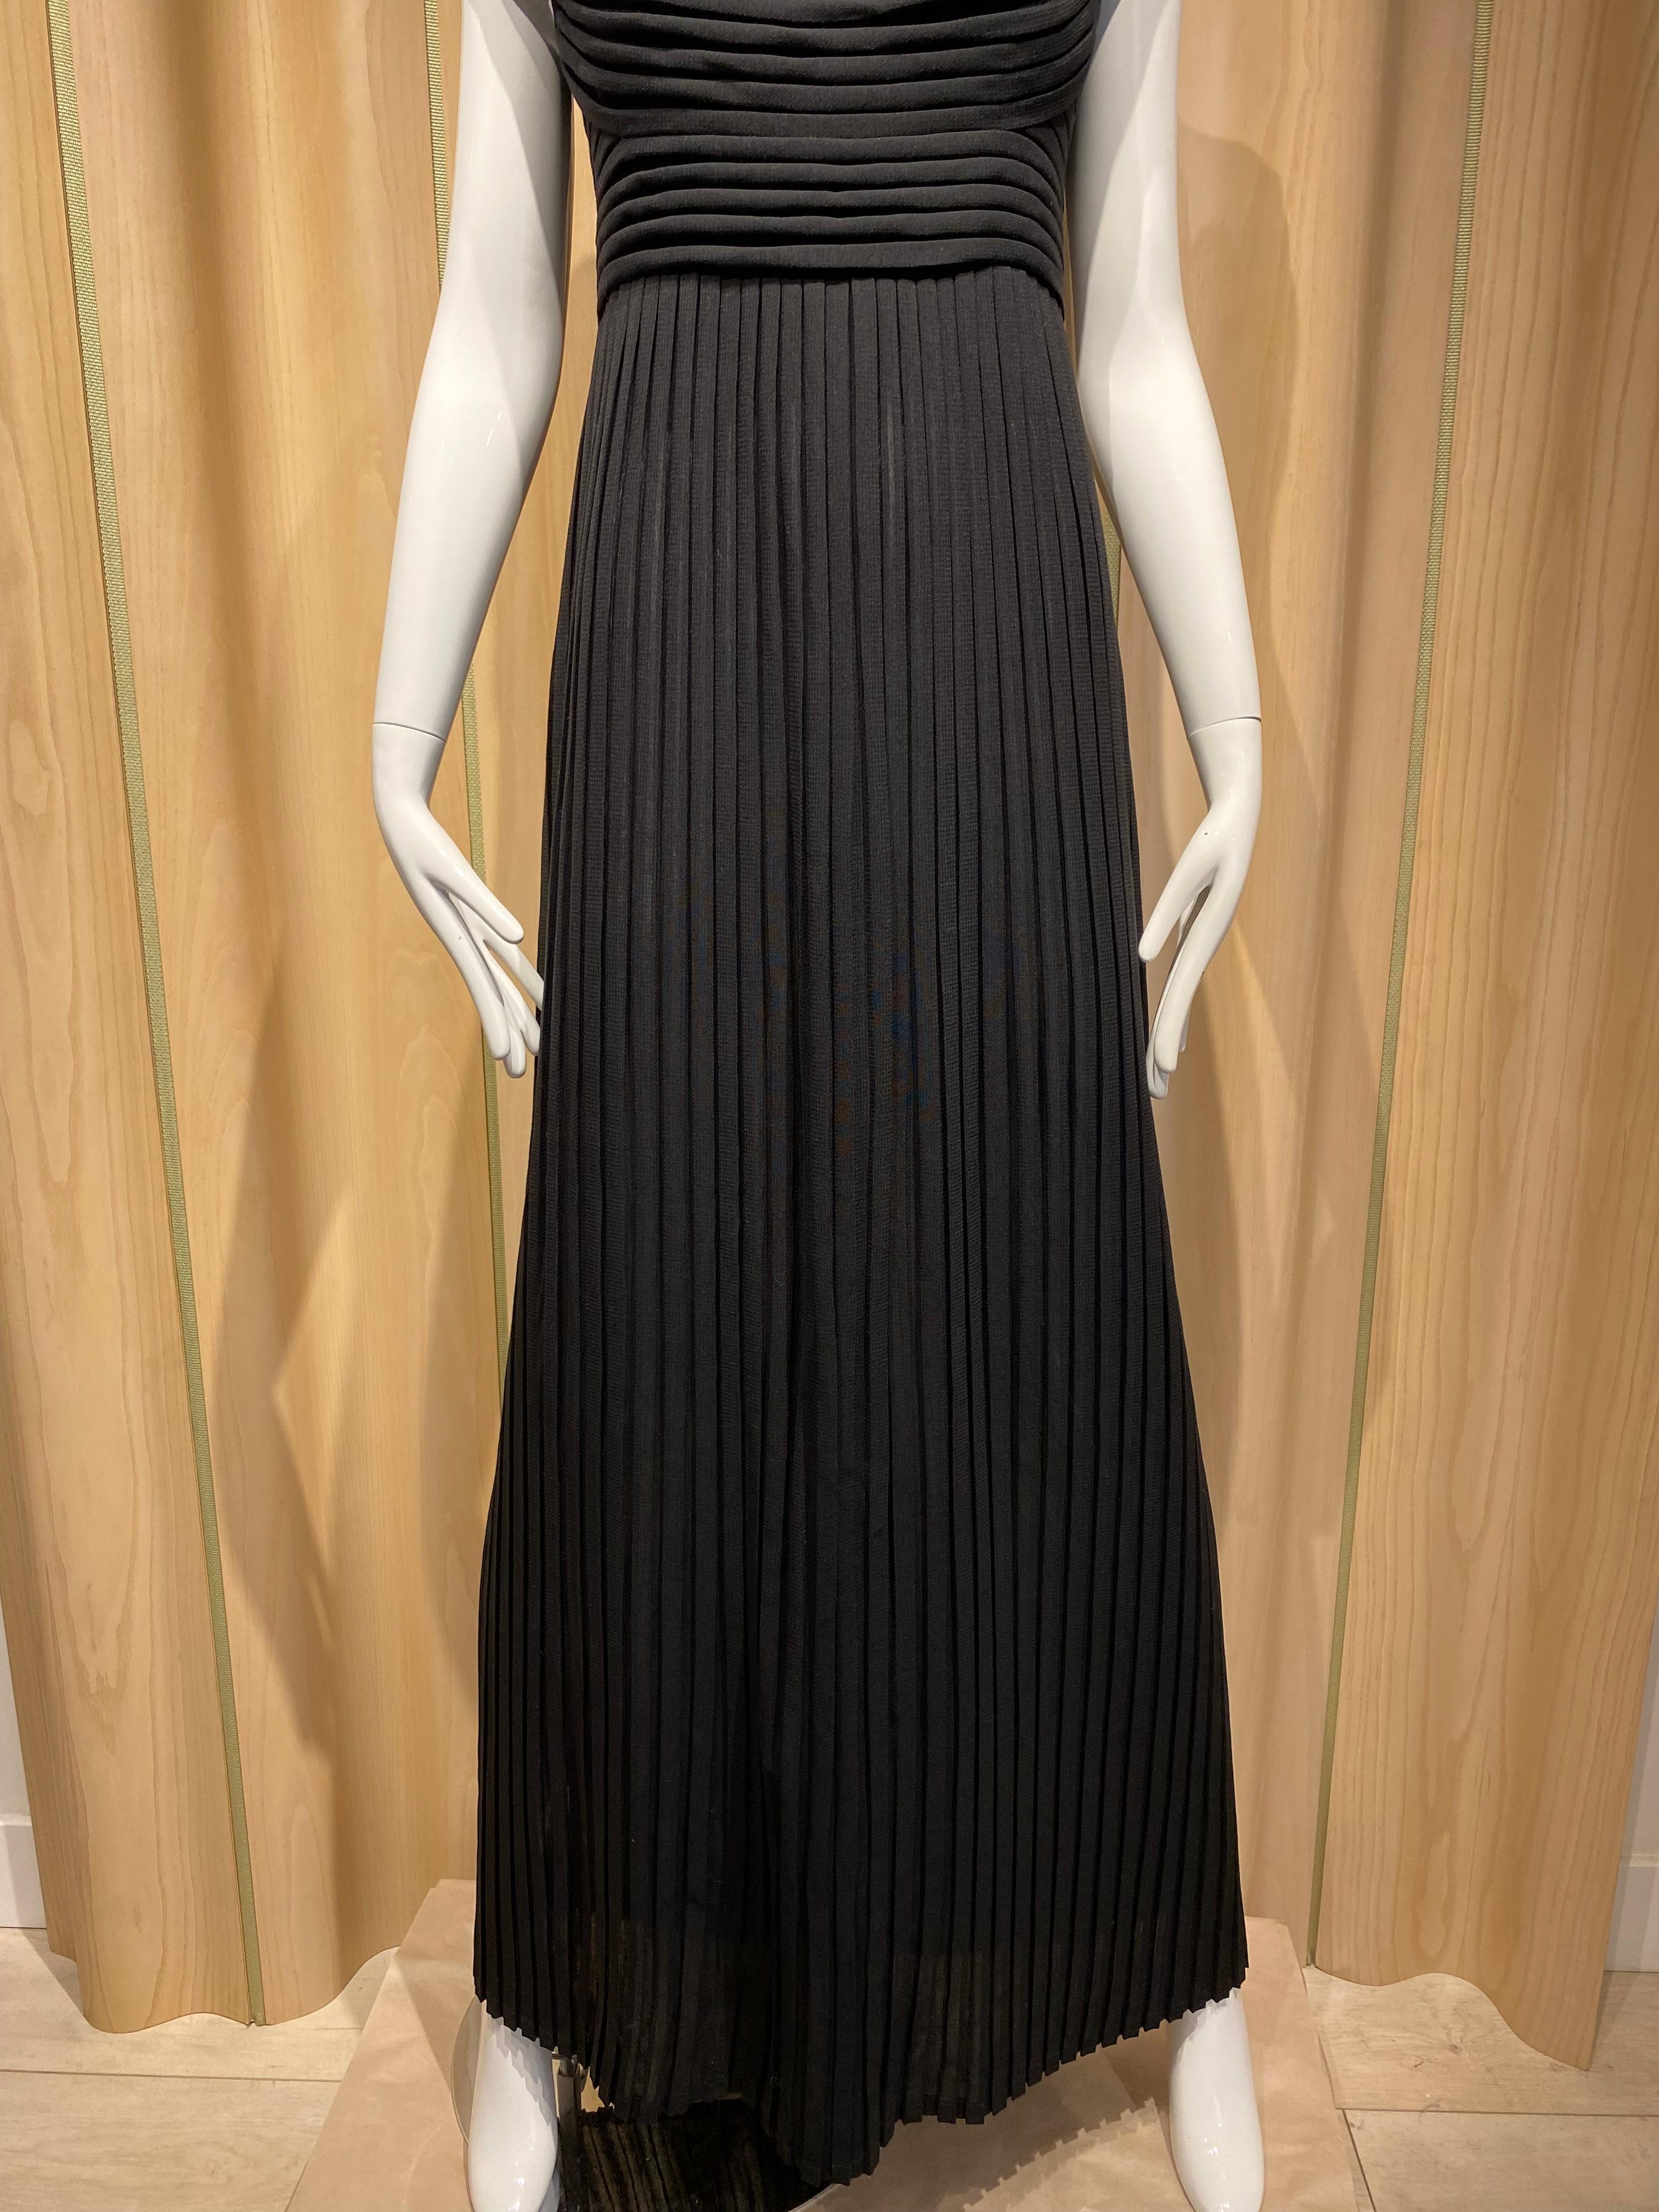 90s Gianfranco Ferre Black Pleated Gown im Angebot 1